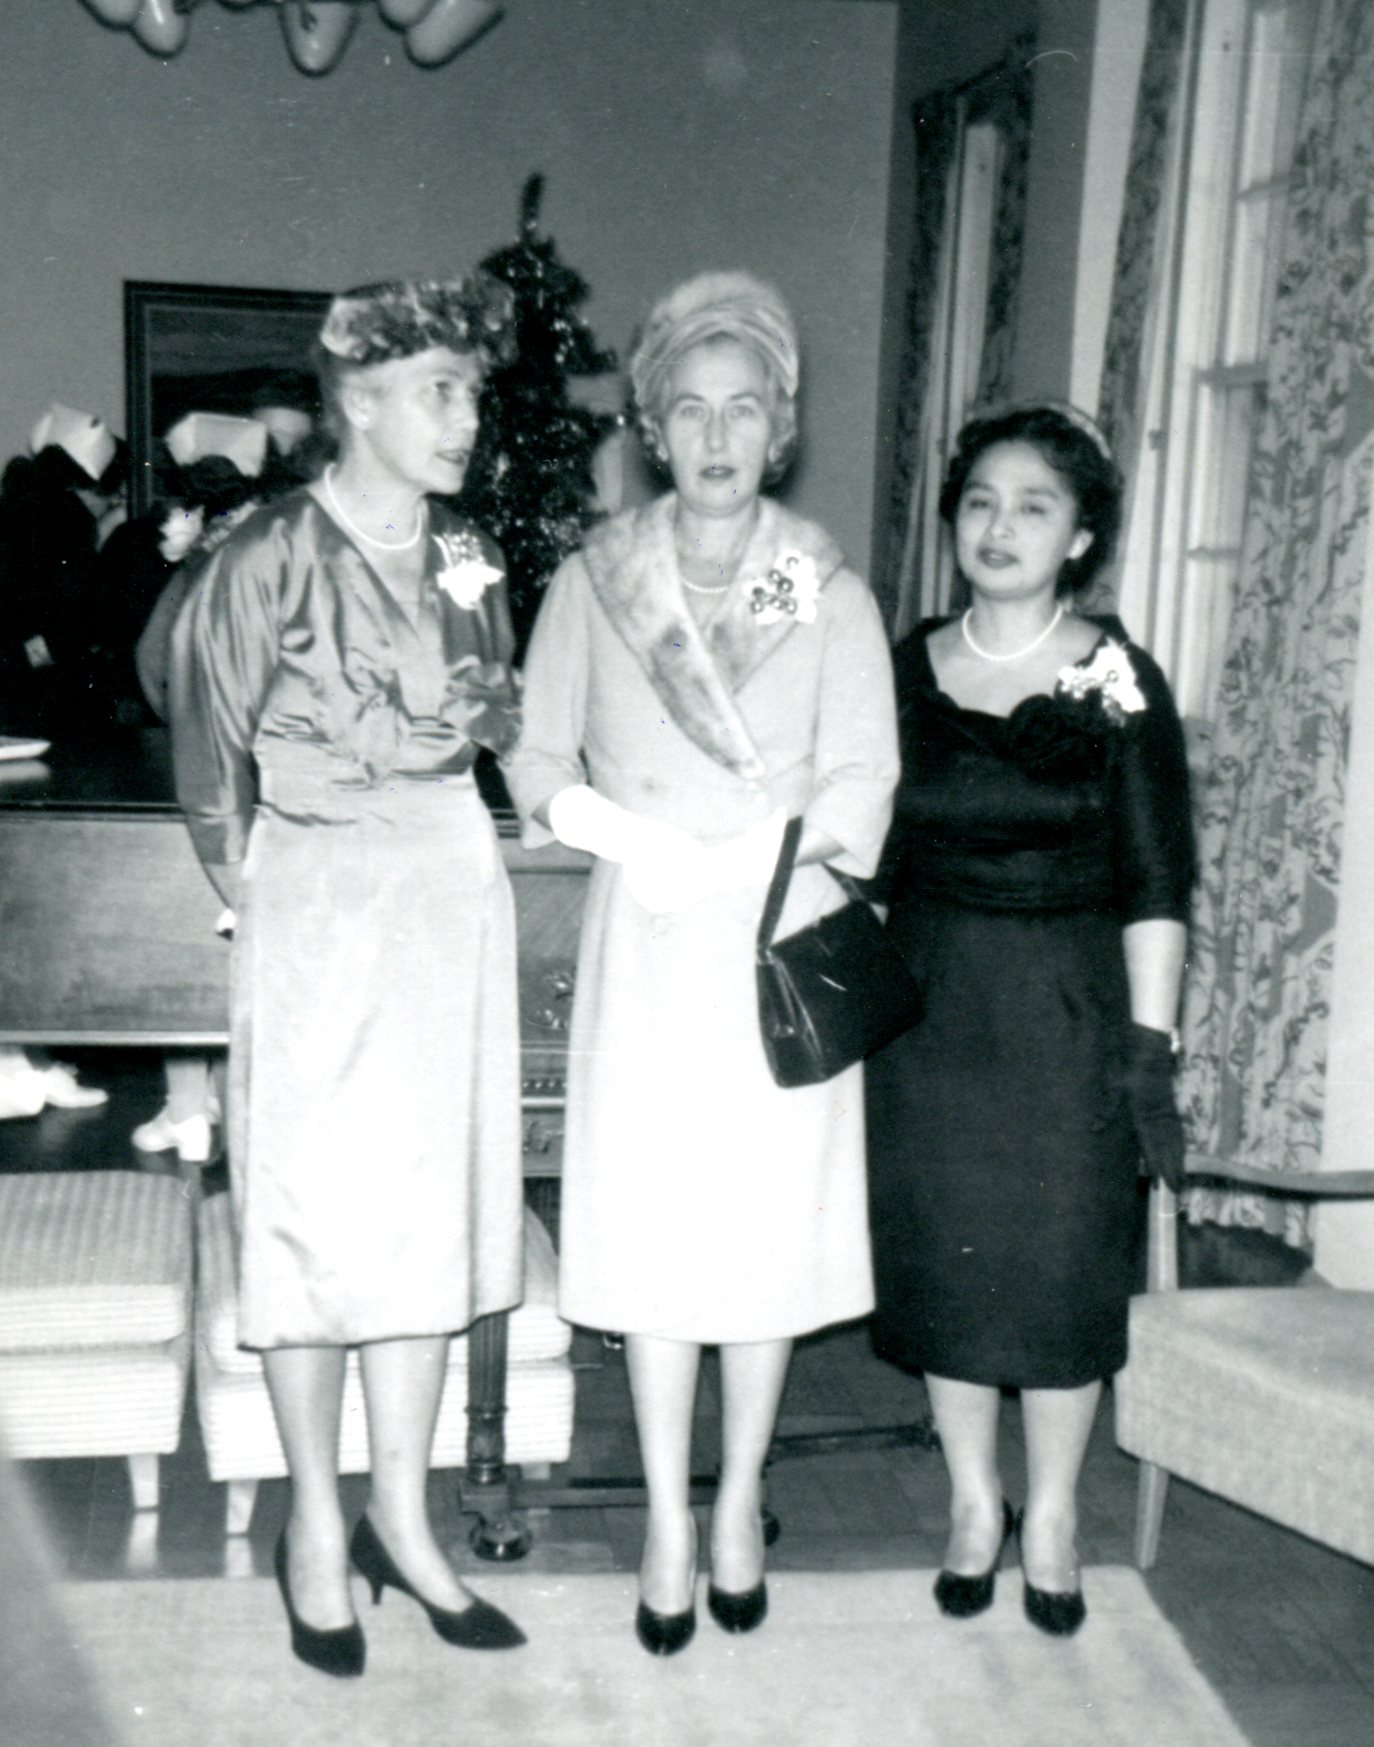 Three women pose for the camera. They are dressed up, and have corsages.